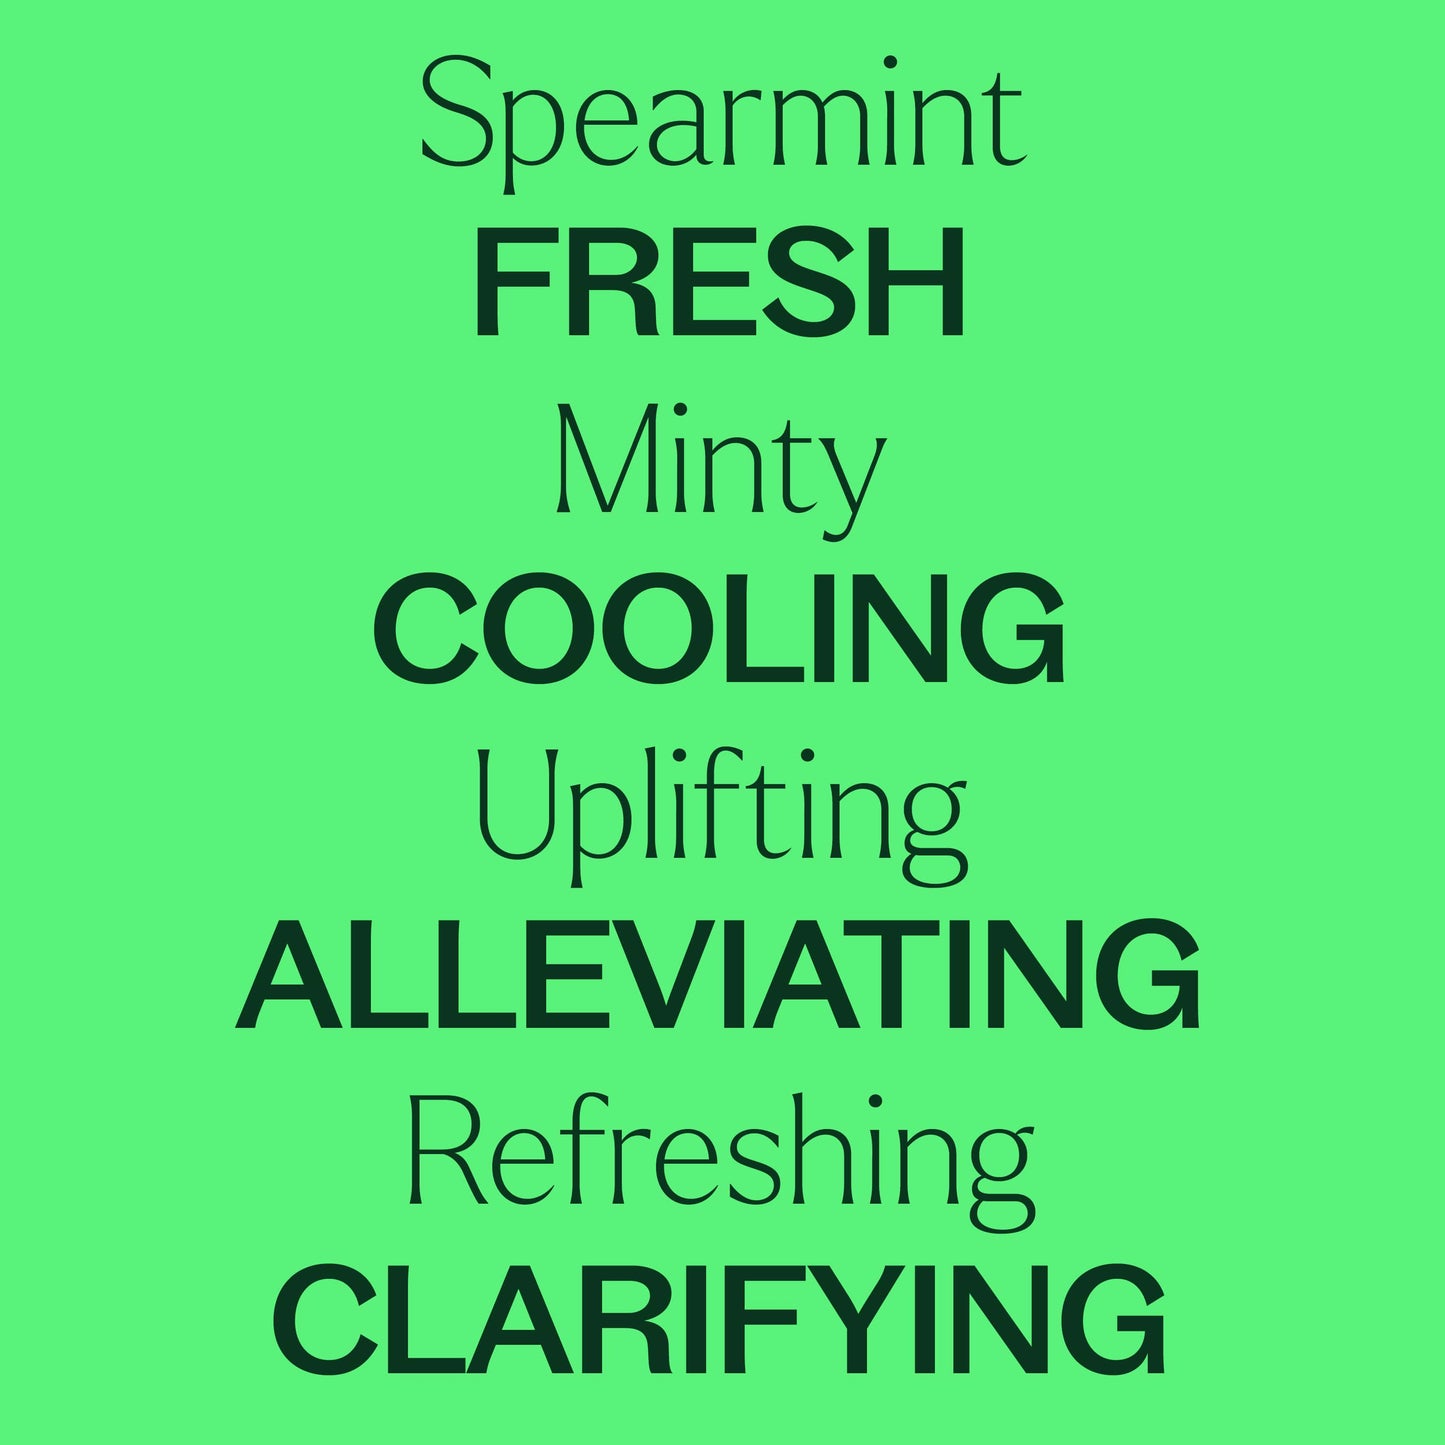 Organic Spearmint Essential Oil is fresh, minty, cooling, uplifting, alleviating, refreshing and clarifying